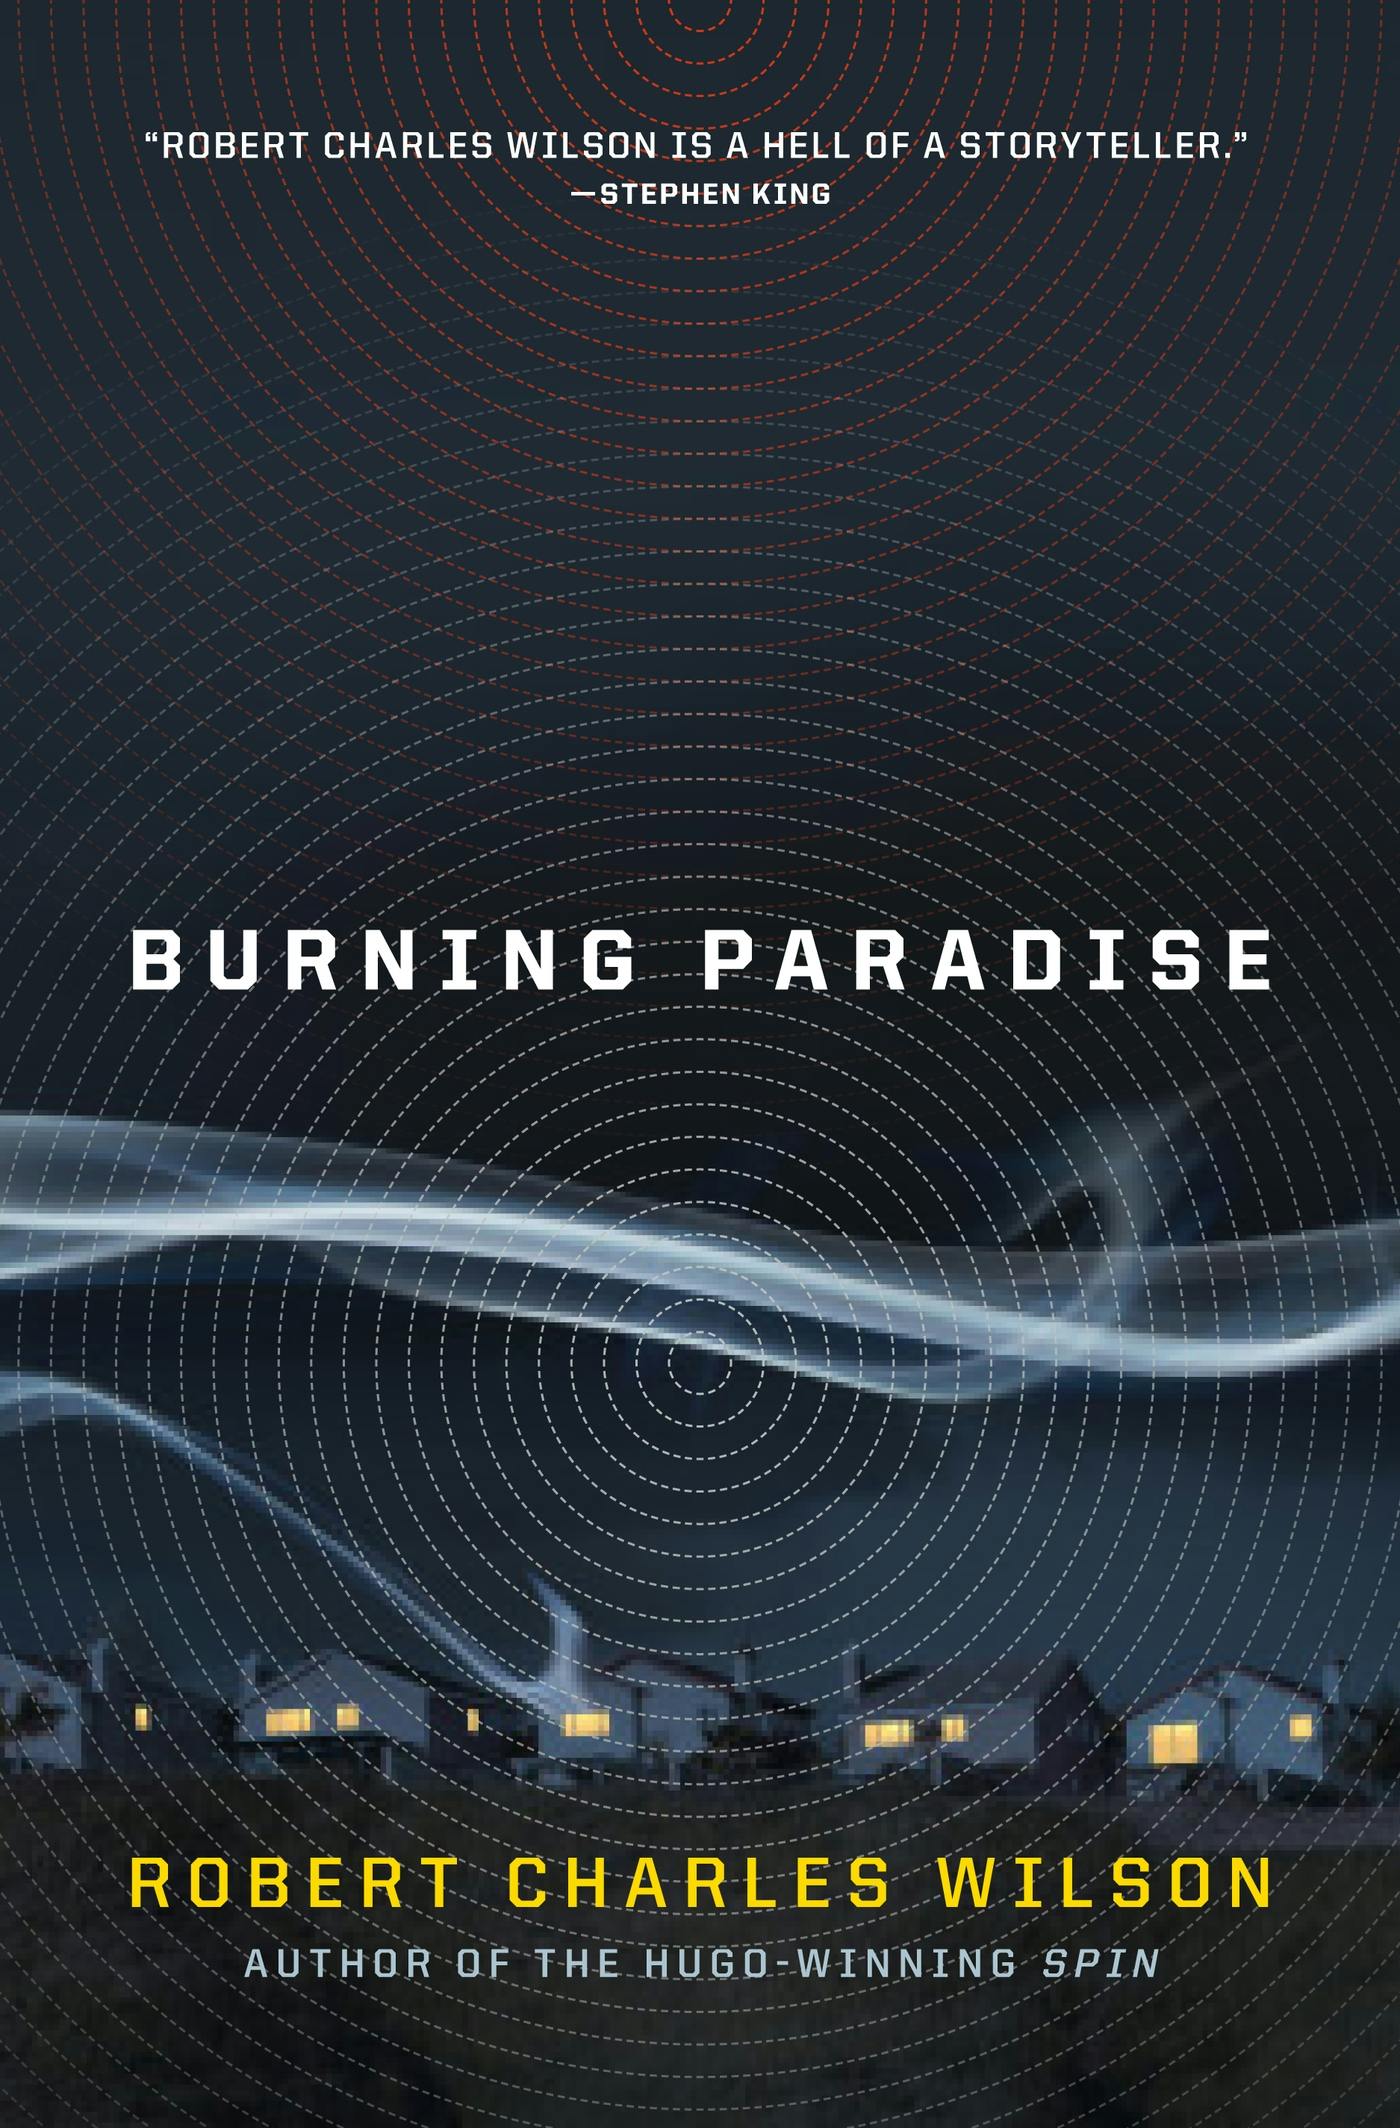 Cover for the book titled as: Burning Paradise